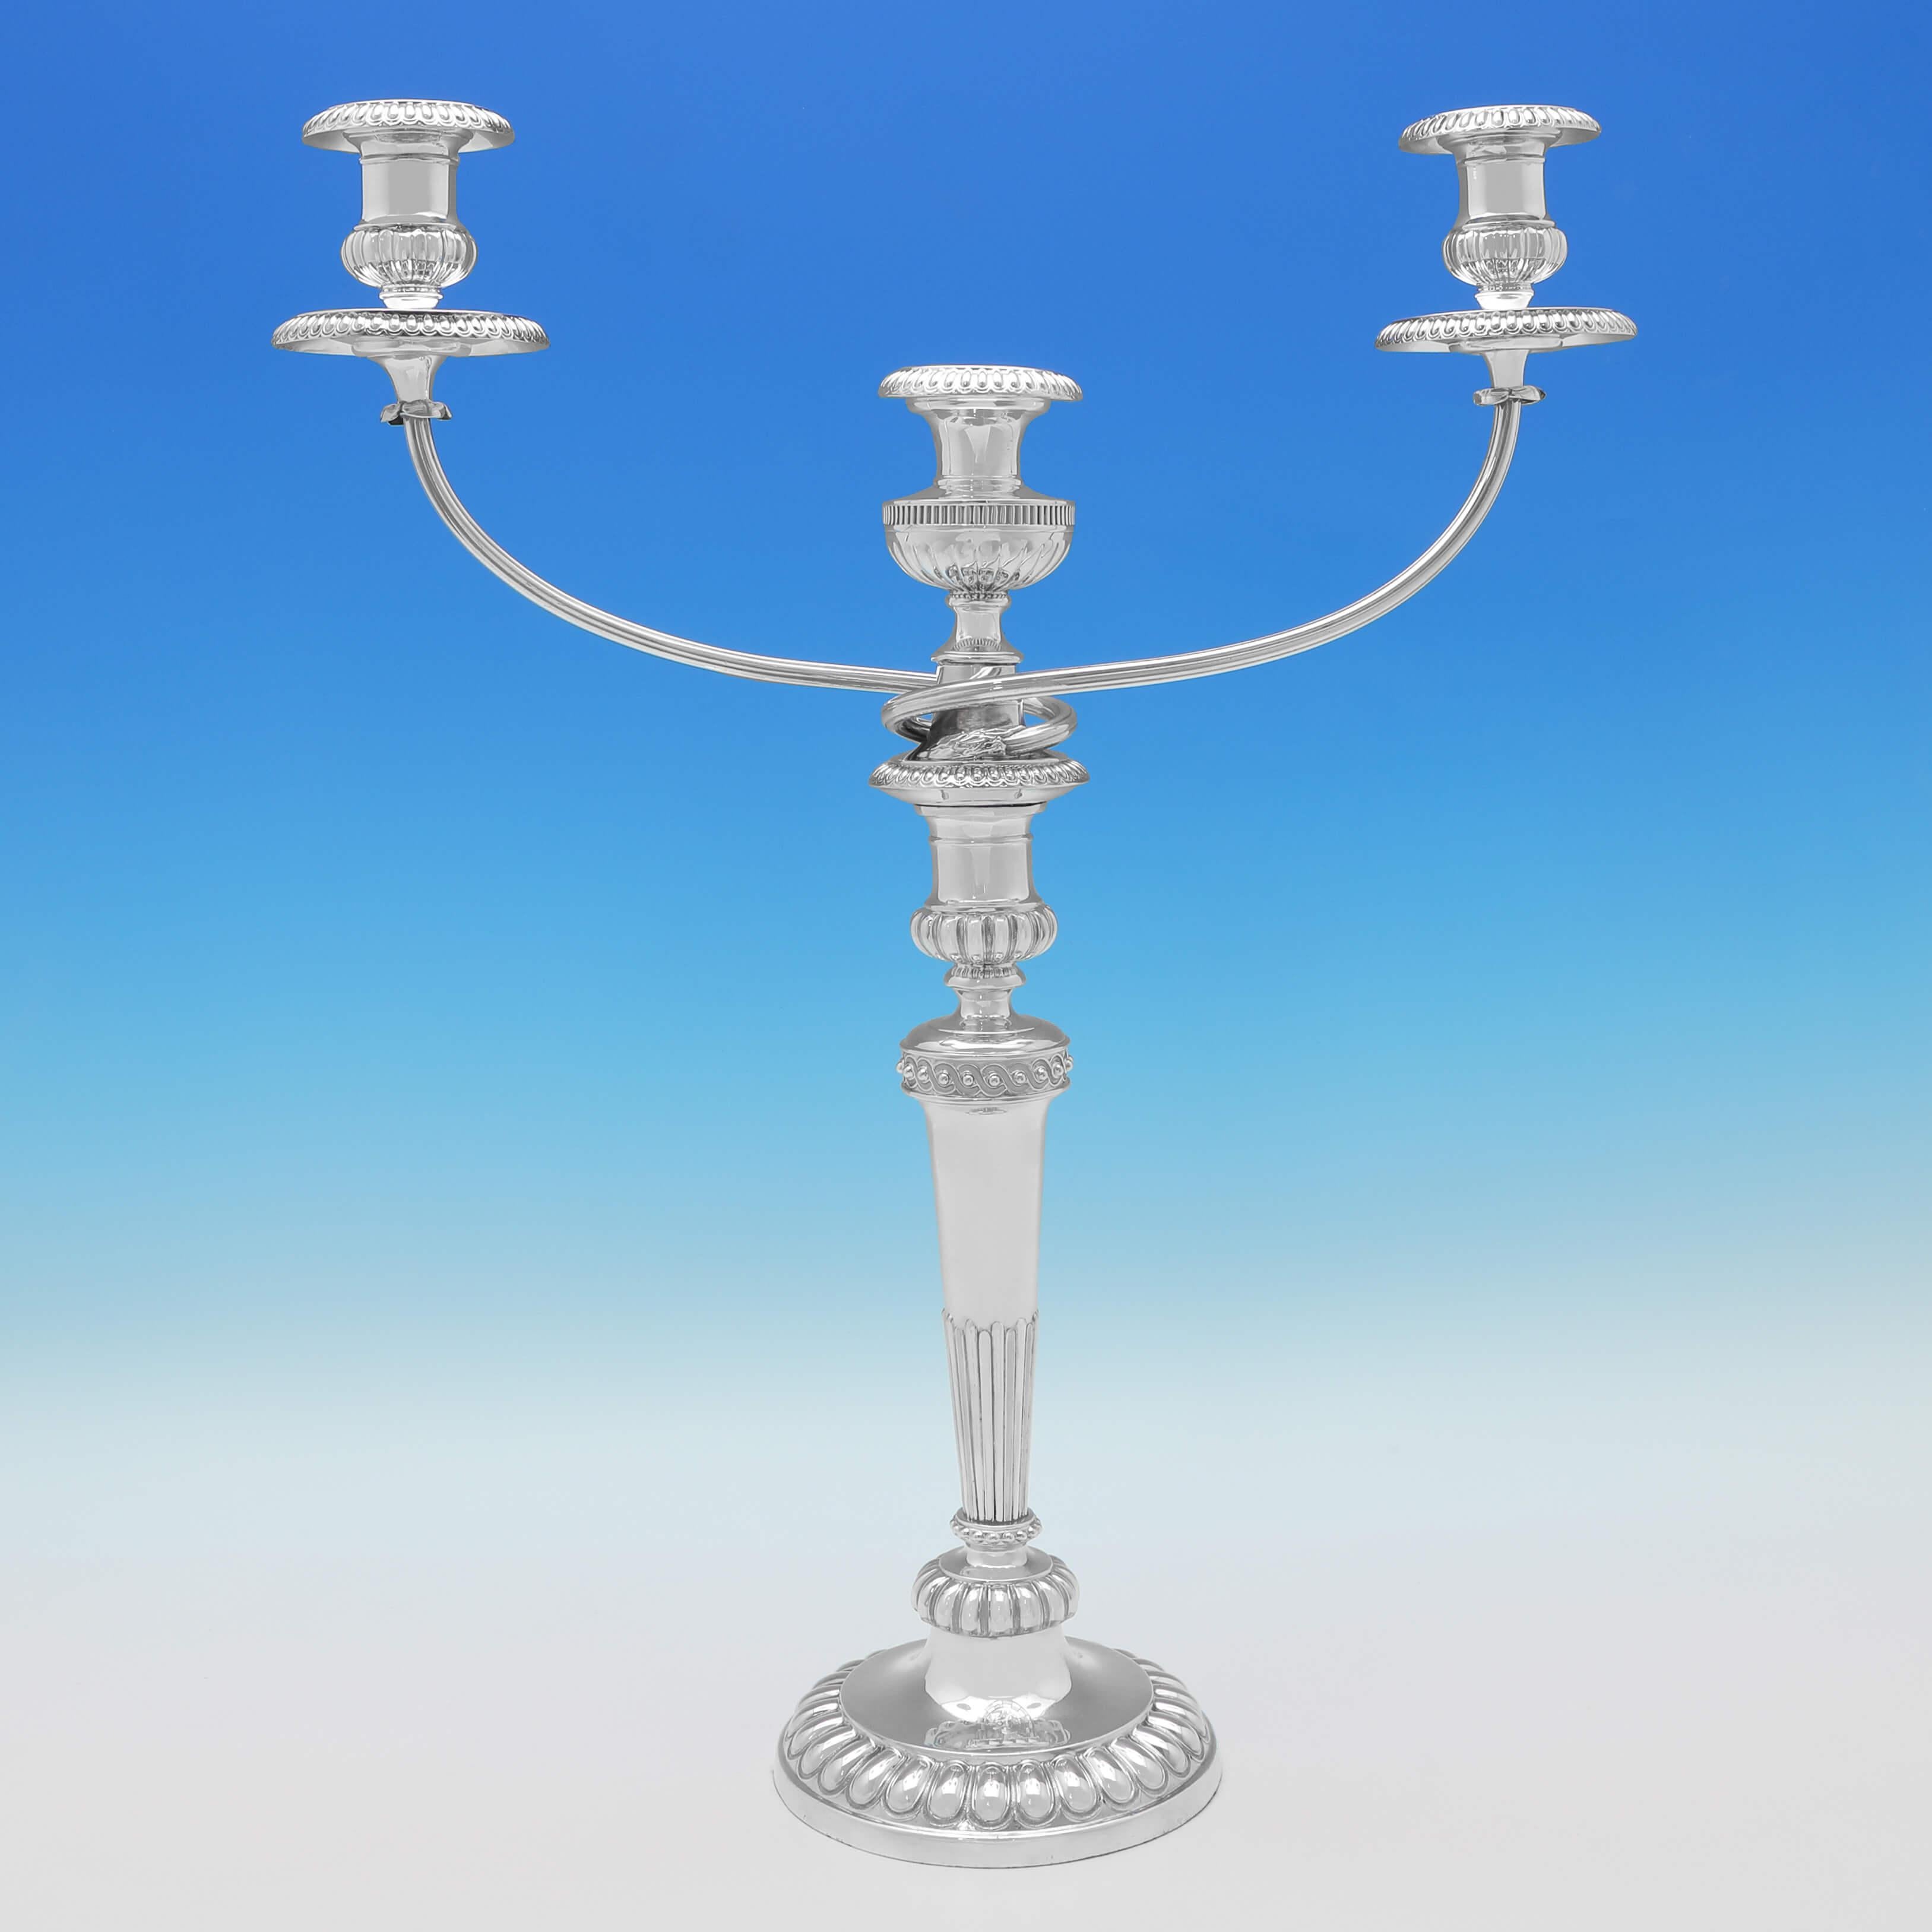 Hallmarked in Sheffield in 1807 & 1808 by John Roberts & Co., this striking, George III, pair of Antique Sterling Silver Candelabra, are in the Regency taste, with acanthus and gadroon detailing, engraved crests, and will hold three candles. Each